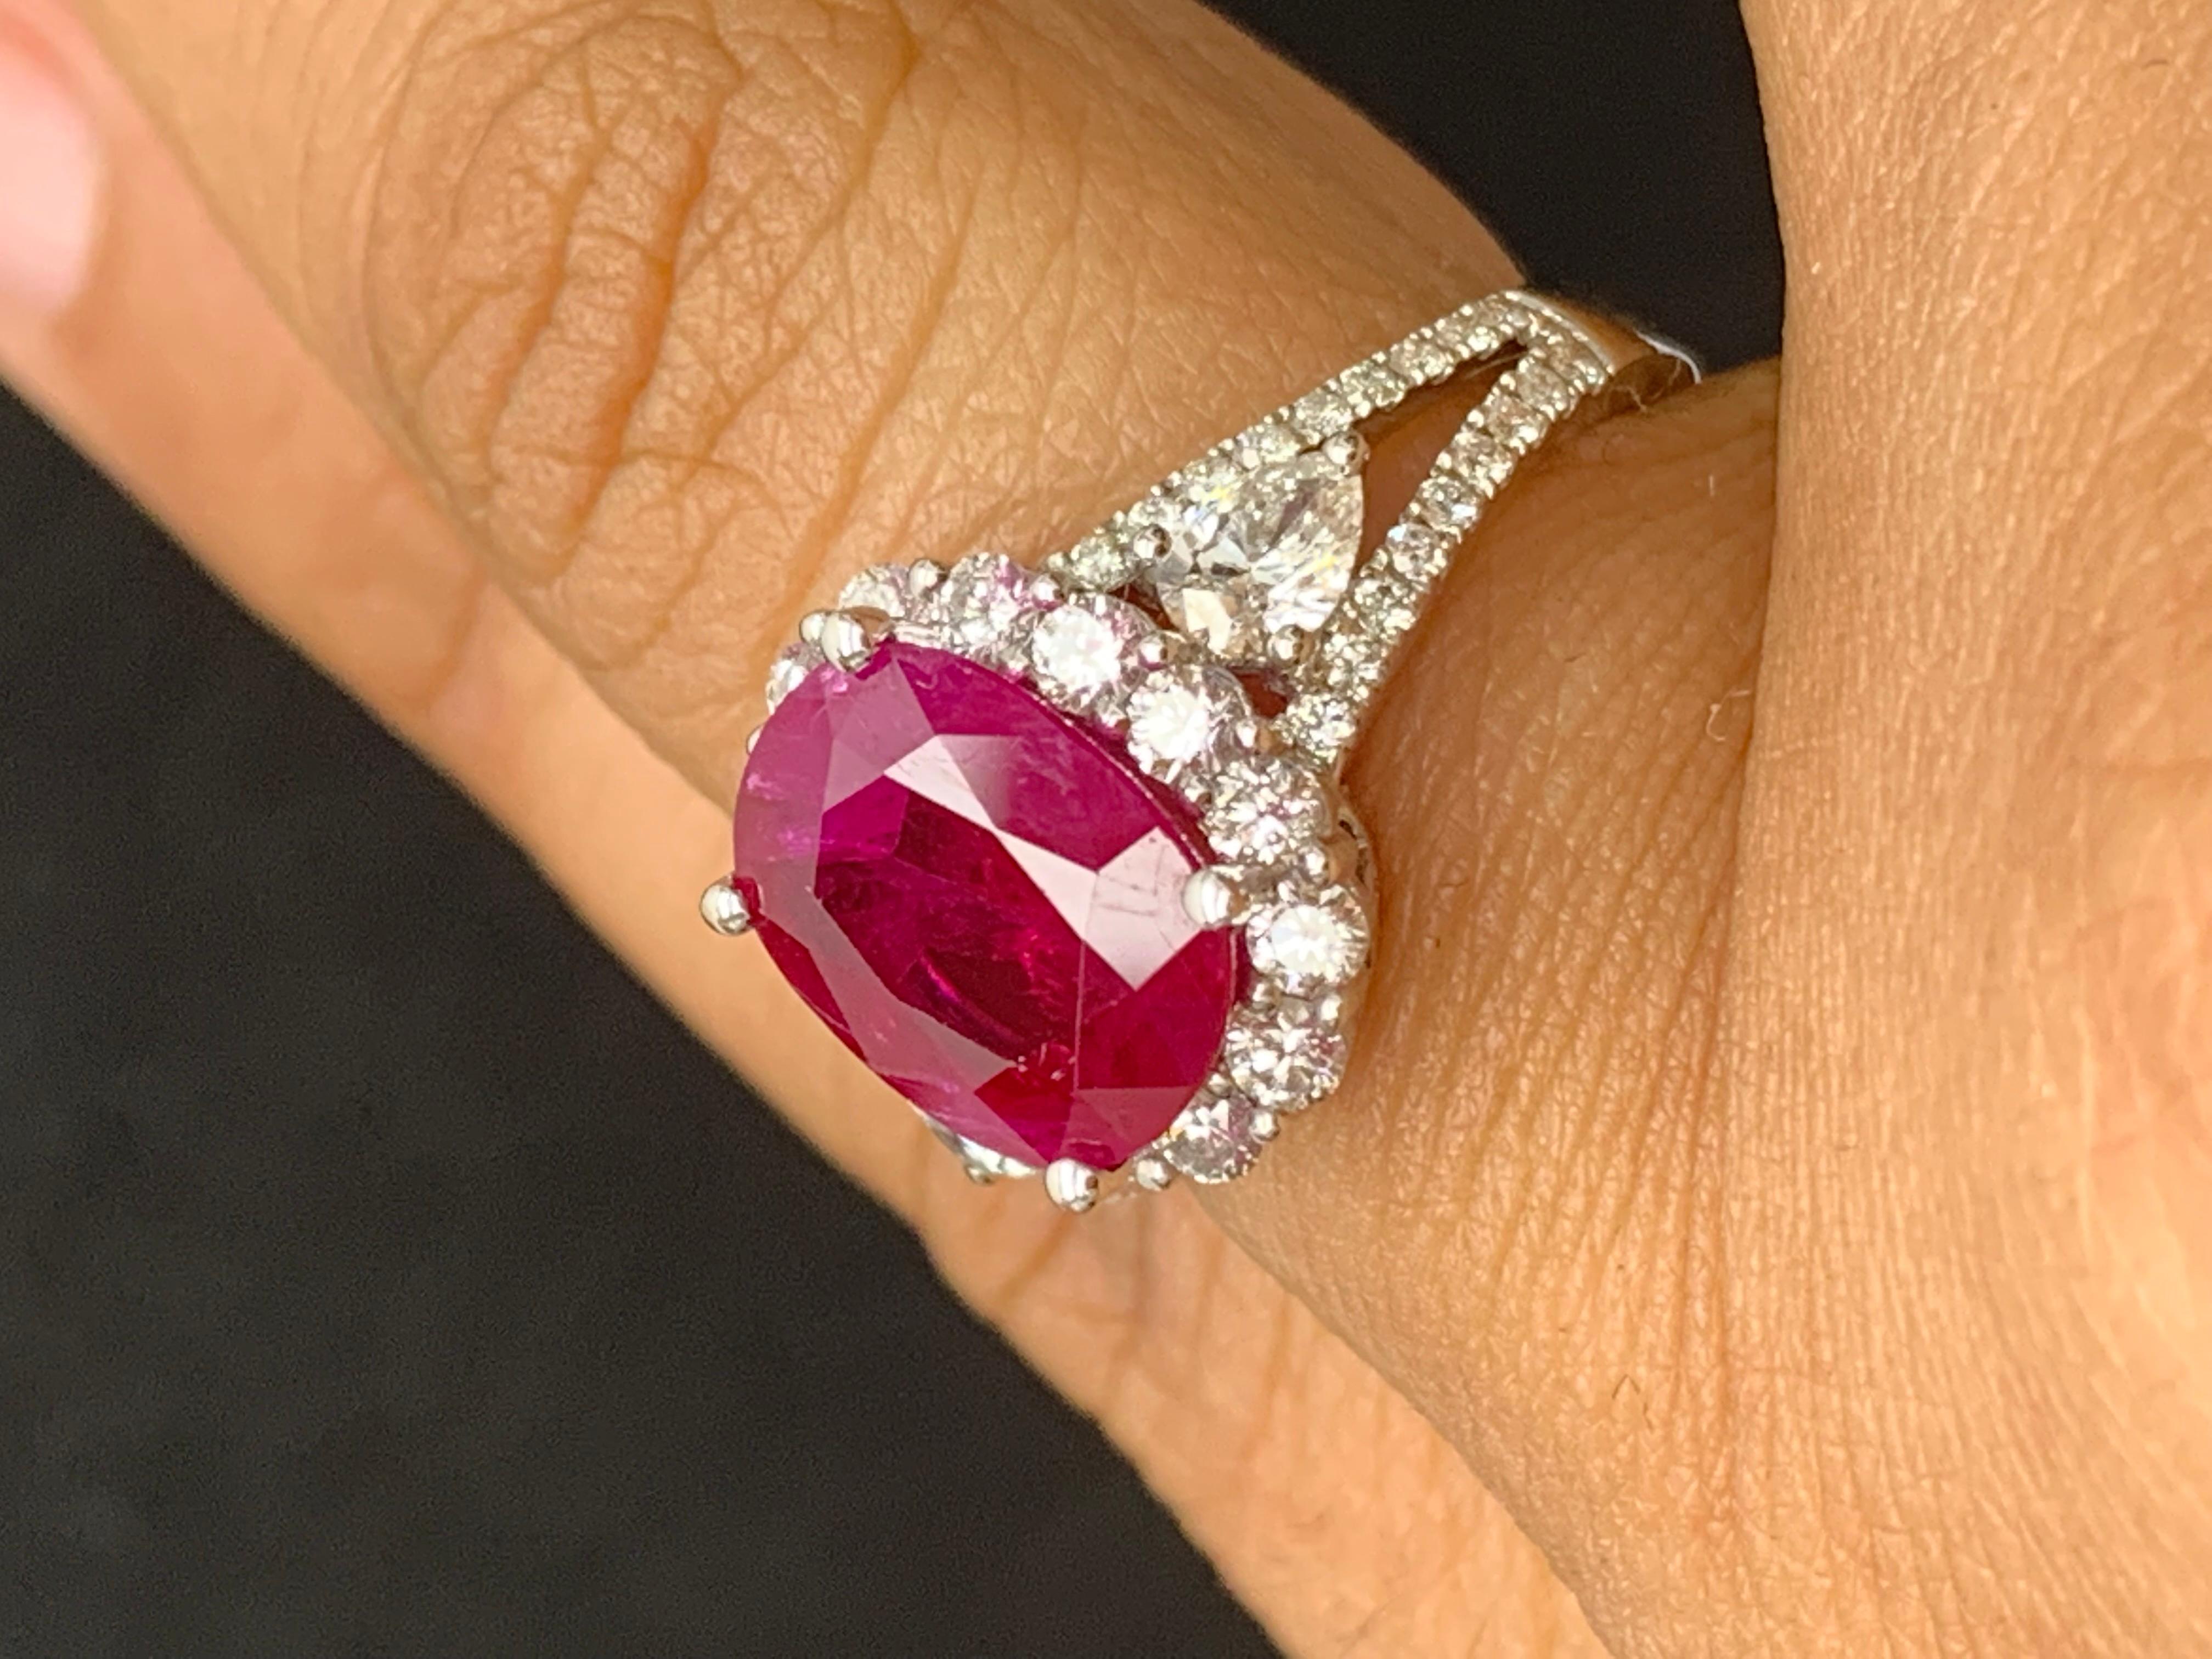 3.58 Carat Oval Cut Ruby and Diamond Halo Ring in 18K White Gold For Sale 2